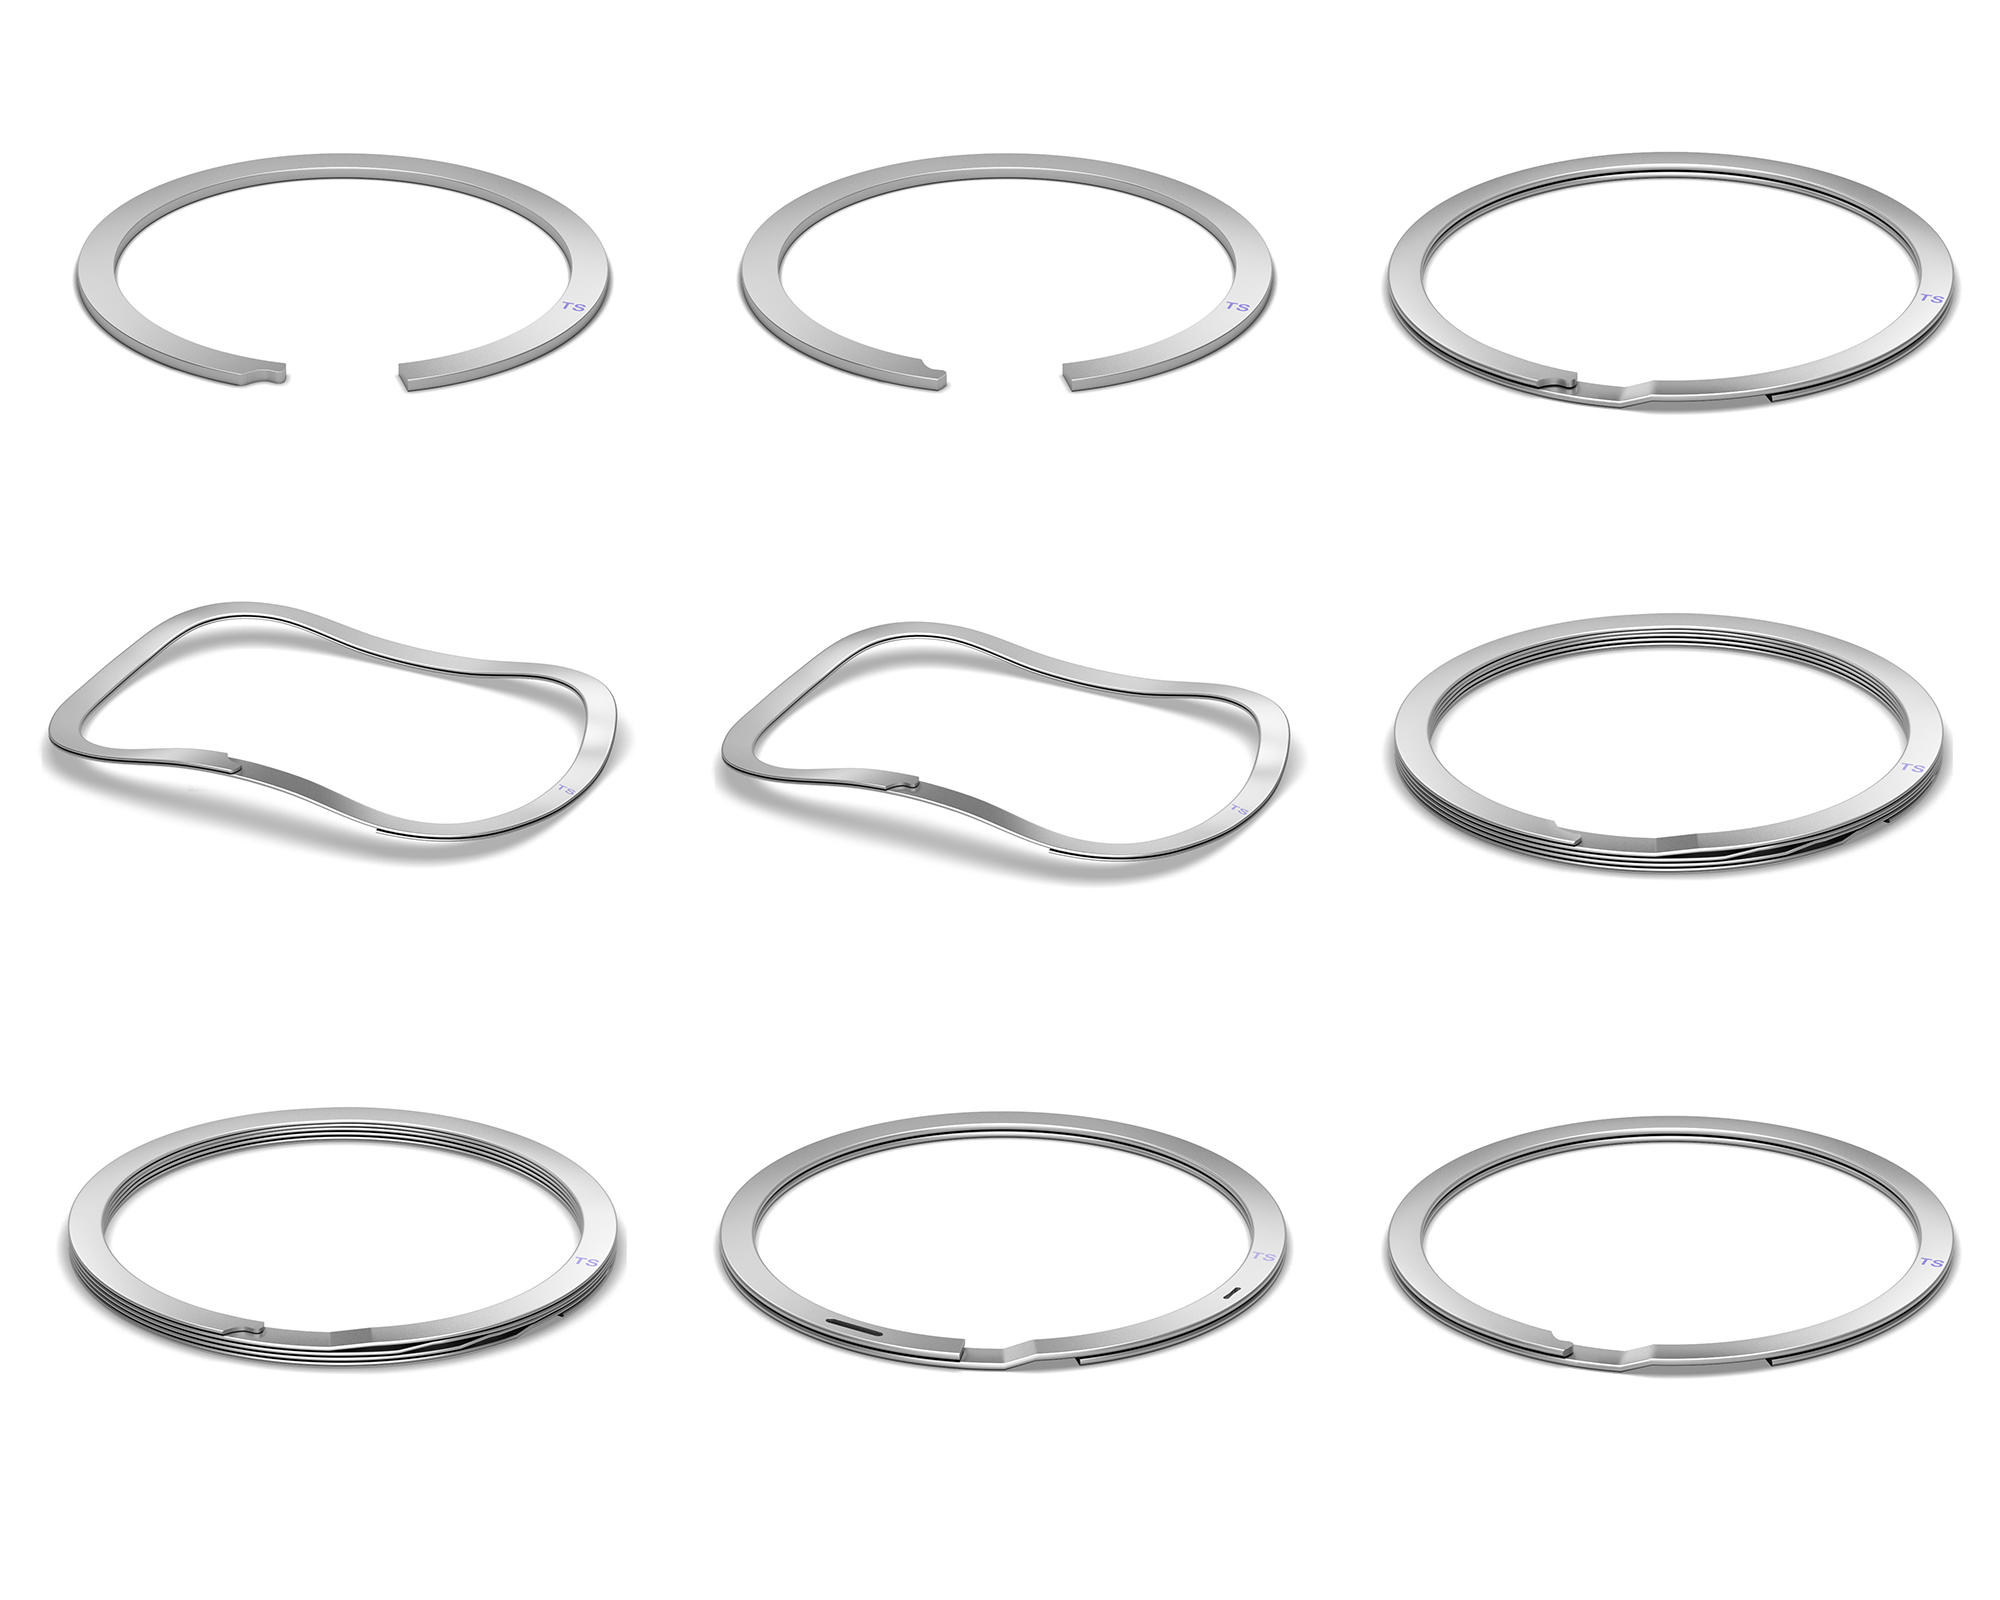 WYTCH316-09 316LVM Stainless Steel Wire Pack of 5 Precision Tolerance Bright Finish 0.005 Diameter VAR Vacuum Arc Remelted 36 Length ASTM A313/ASTM F138 Spring Temper 